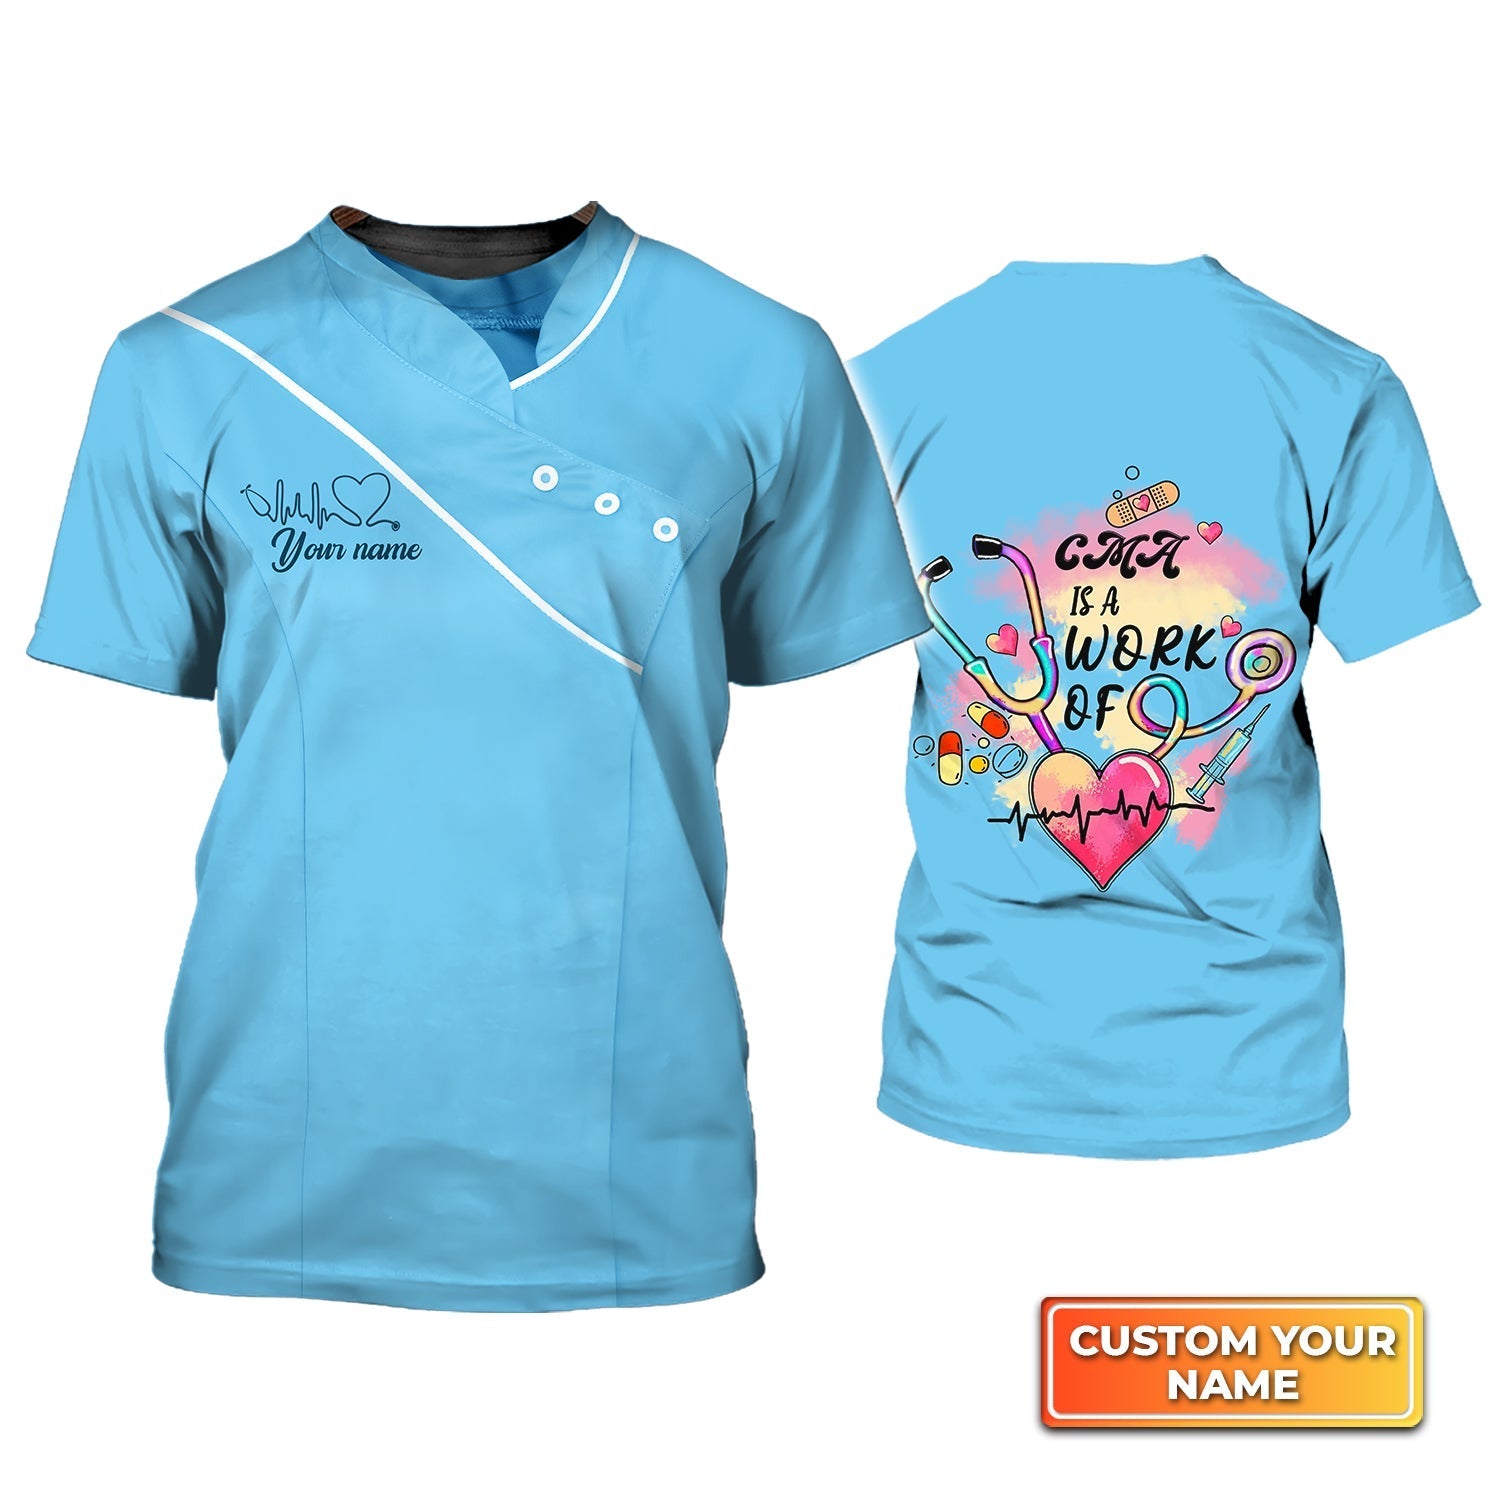 Personalized Name 3D Cma Tshirt Blue Cma Is A Work Of Heart Registered Nurse